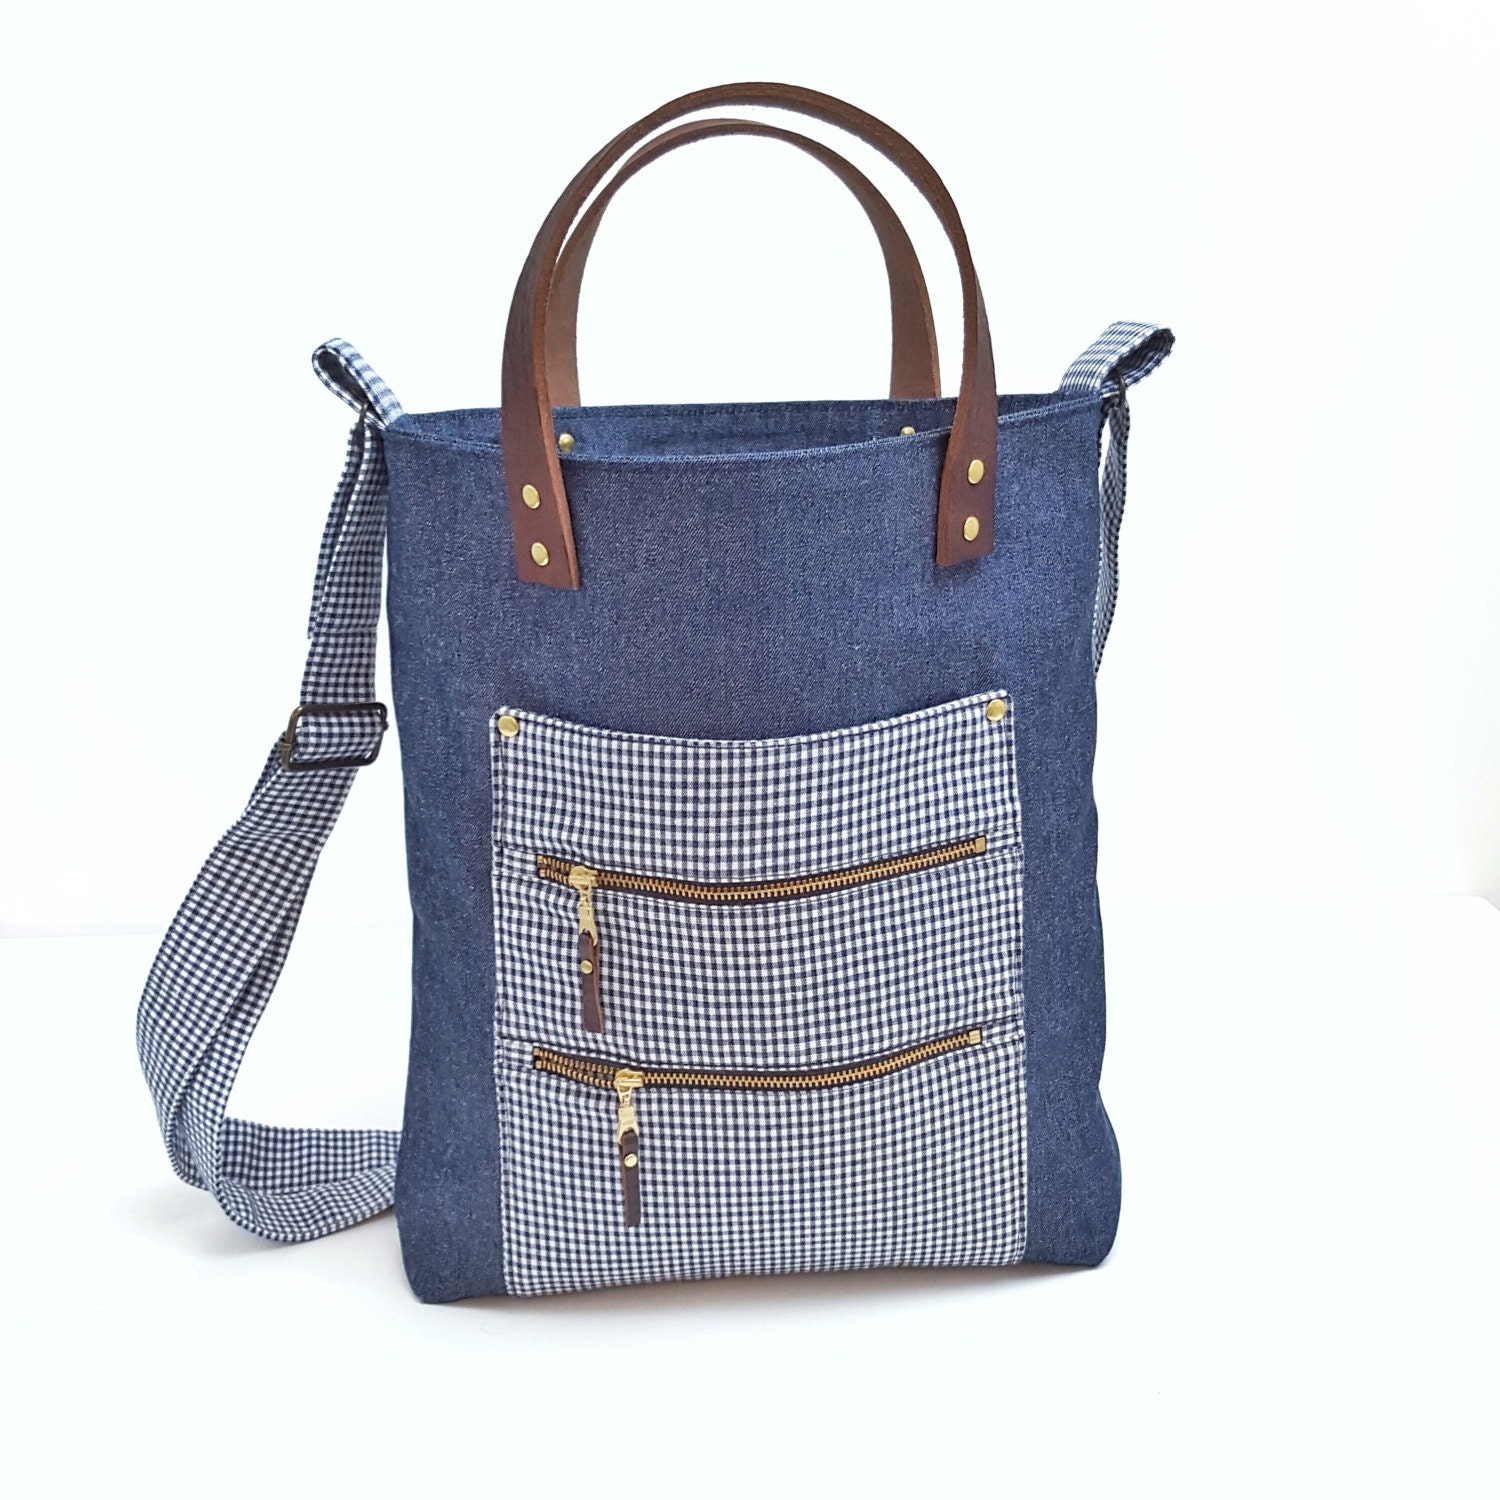 Large Denim & Gingham Tote Bag with Leather Handles / Shopper